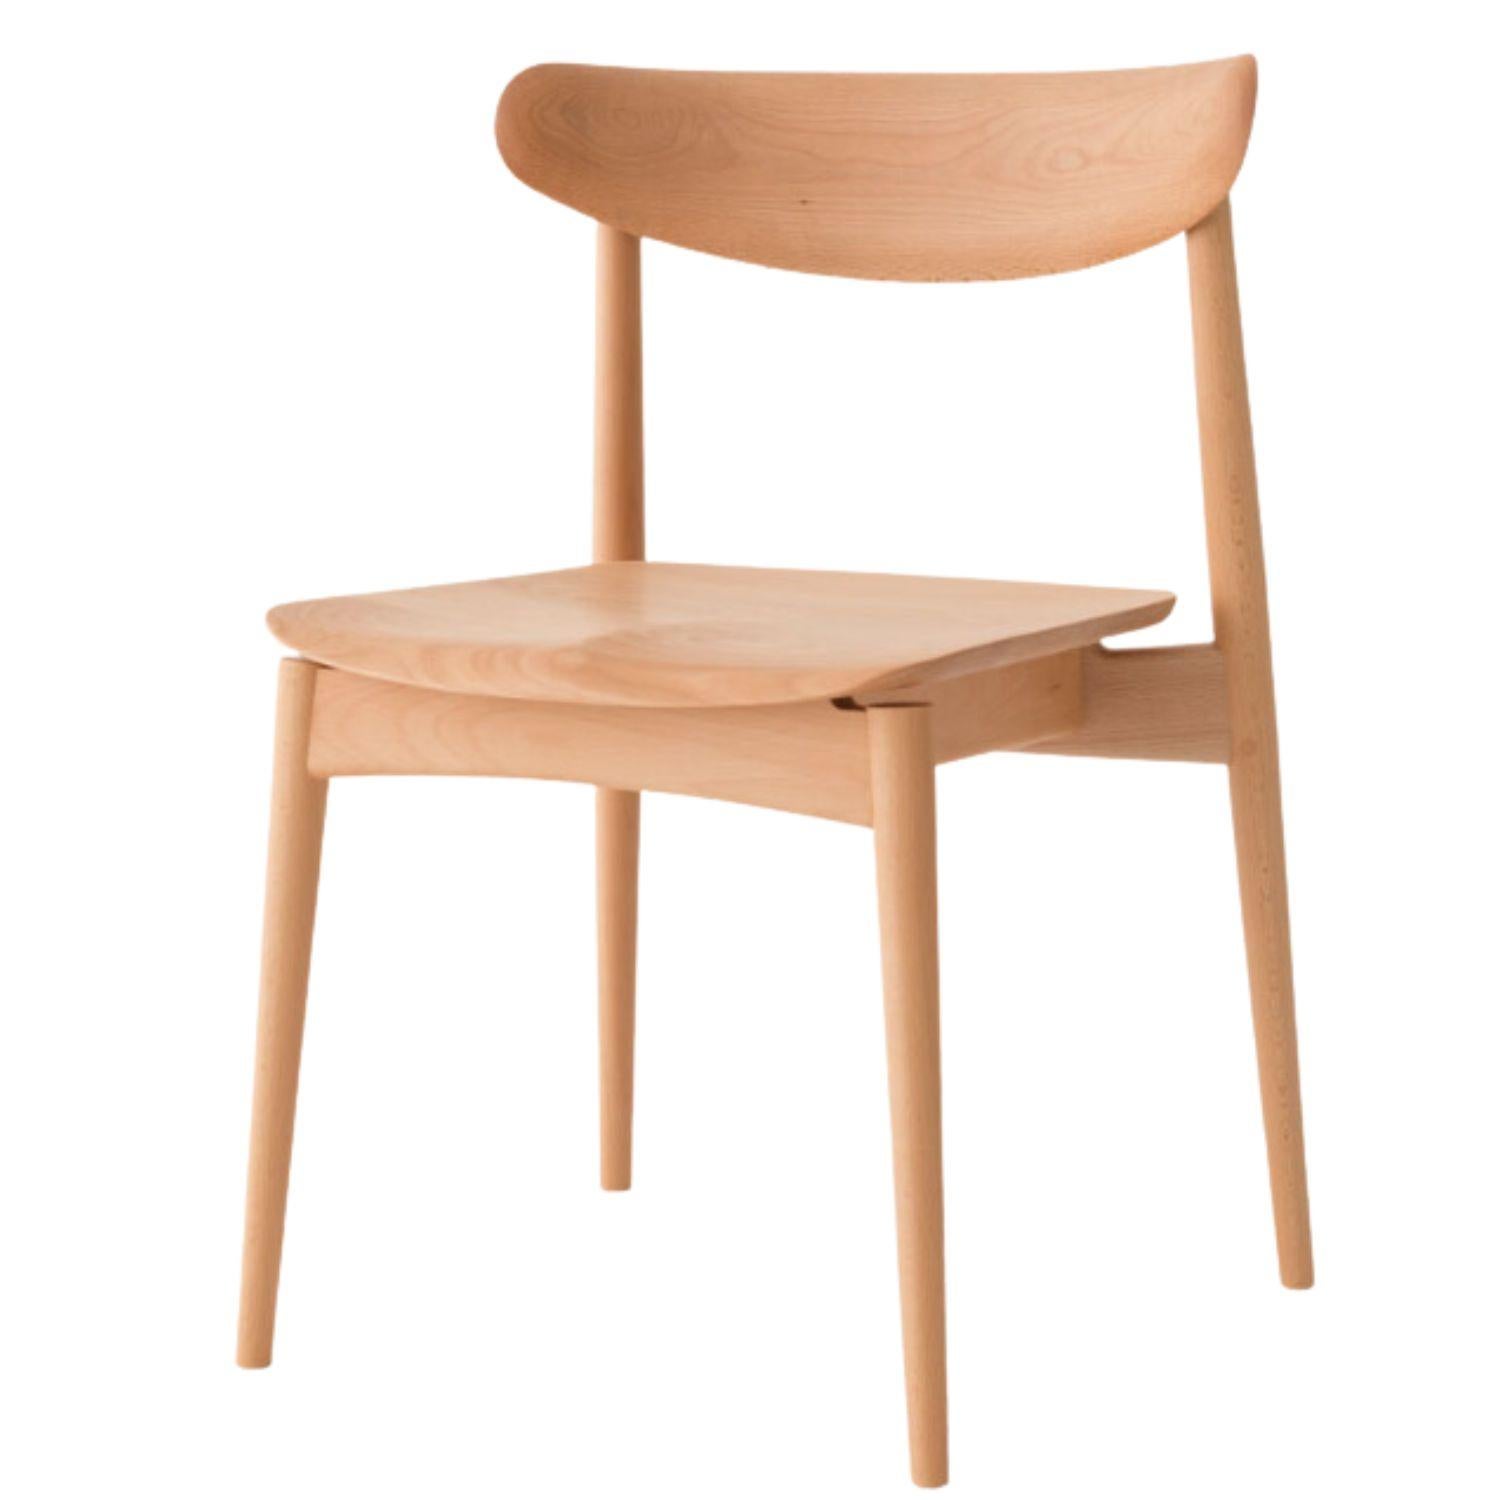 Motomi Kawakami 'Seoto KD201' Dining Chair in Oak and Upholstery for Hida For Sale 3